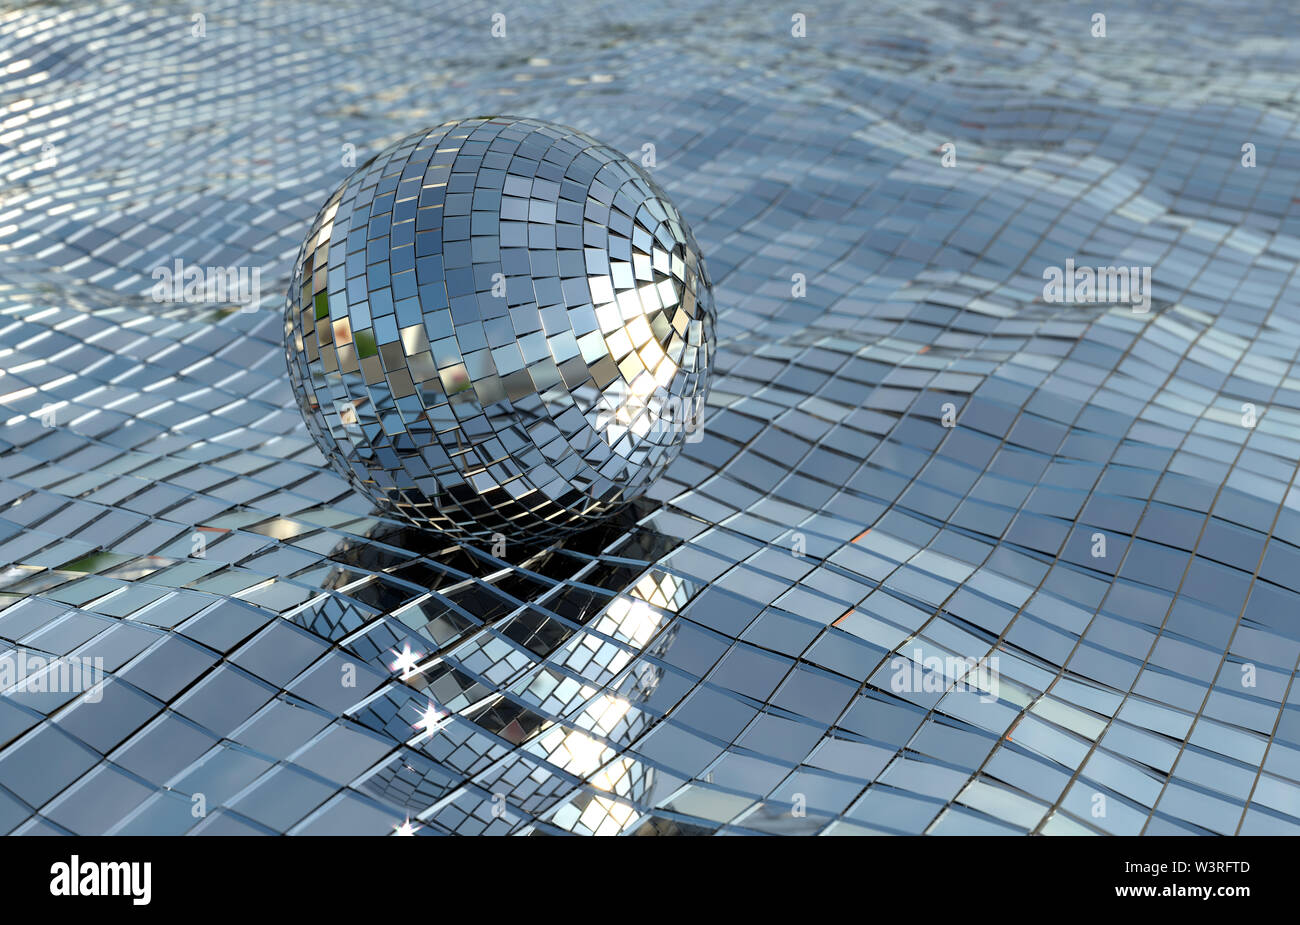 Disco ball (or mirror ball) floating on a mirror sea in the sun, ready for a cooling disco swim? Background image flyer poster Stock Photo